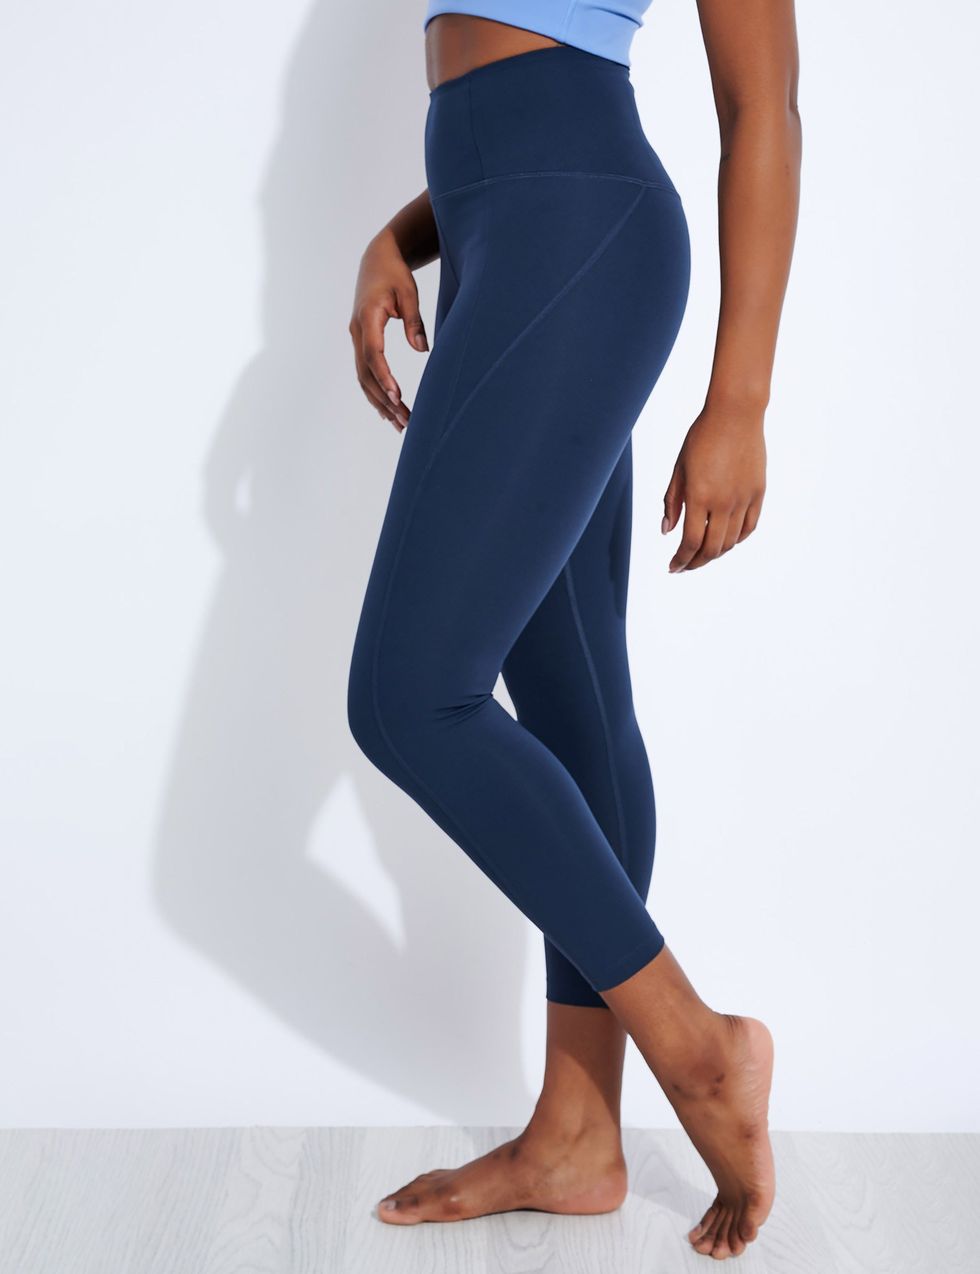 Compressive High Waisted 7/8 Legging in Midnight